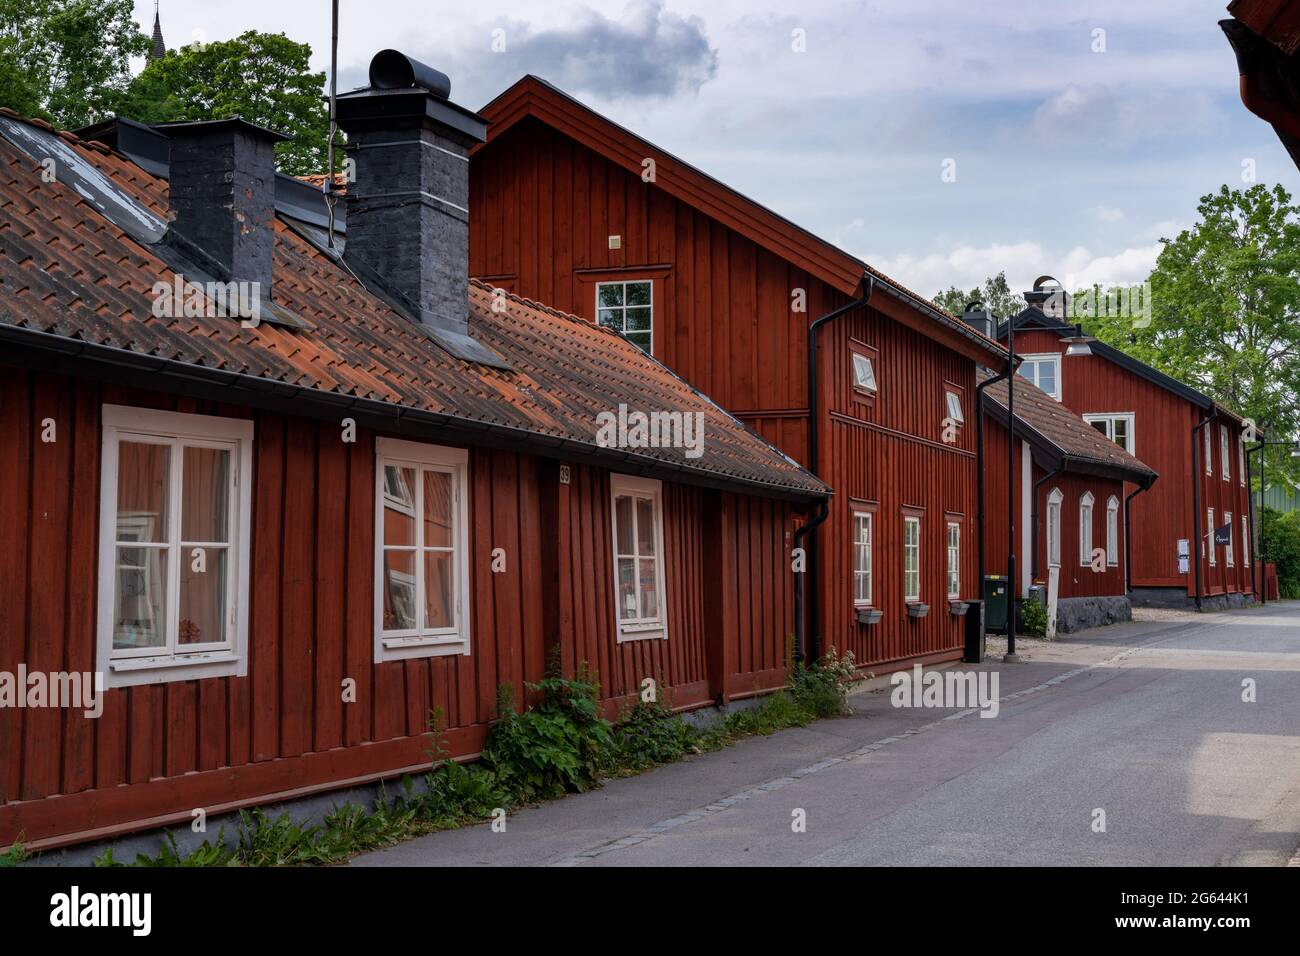 Trosa, Sweden - 22 June, 2021: typical red Swedish wooden houses line the streets of the historic city center of downtown Trosa Stock Photo